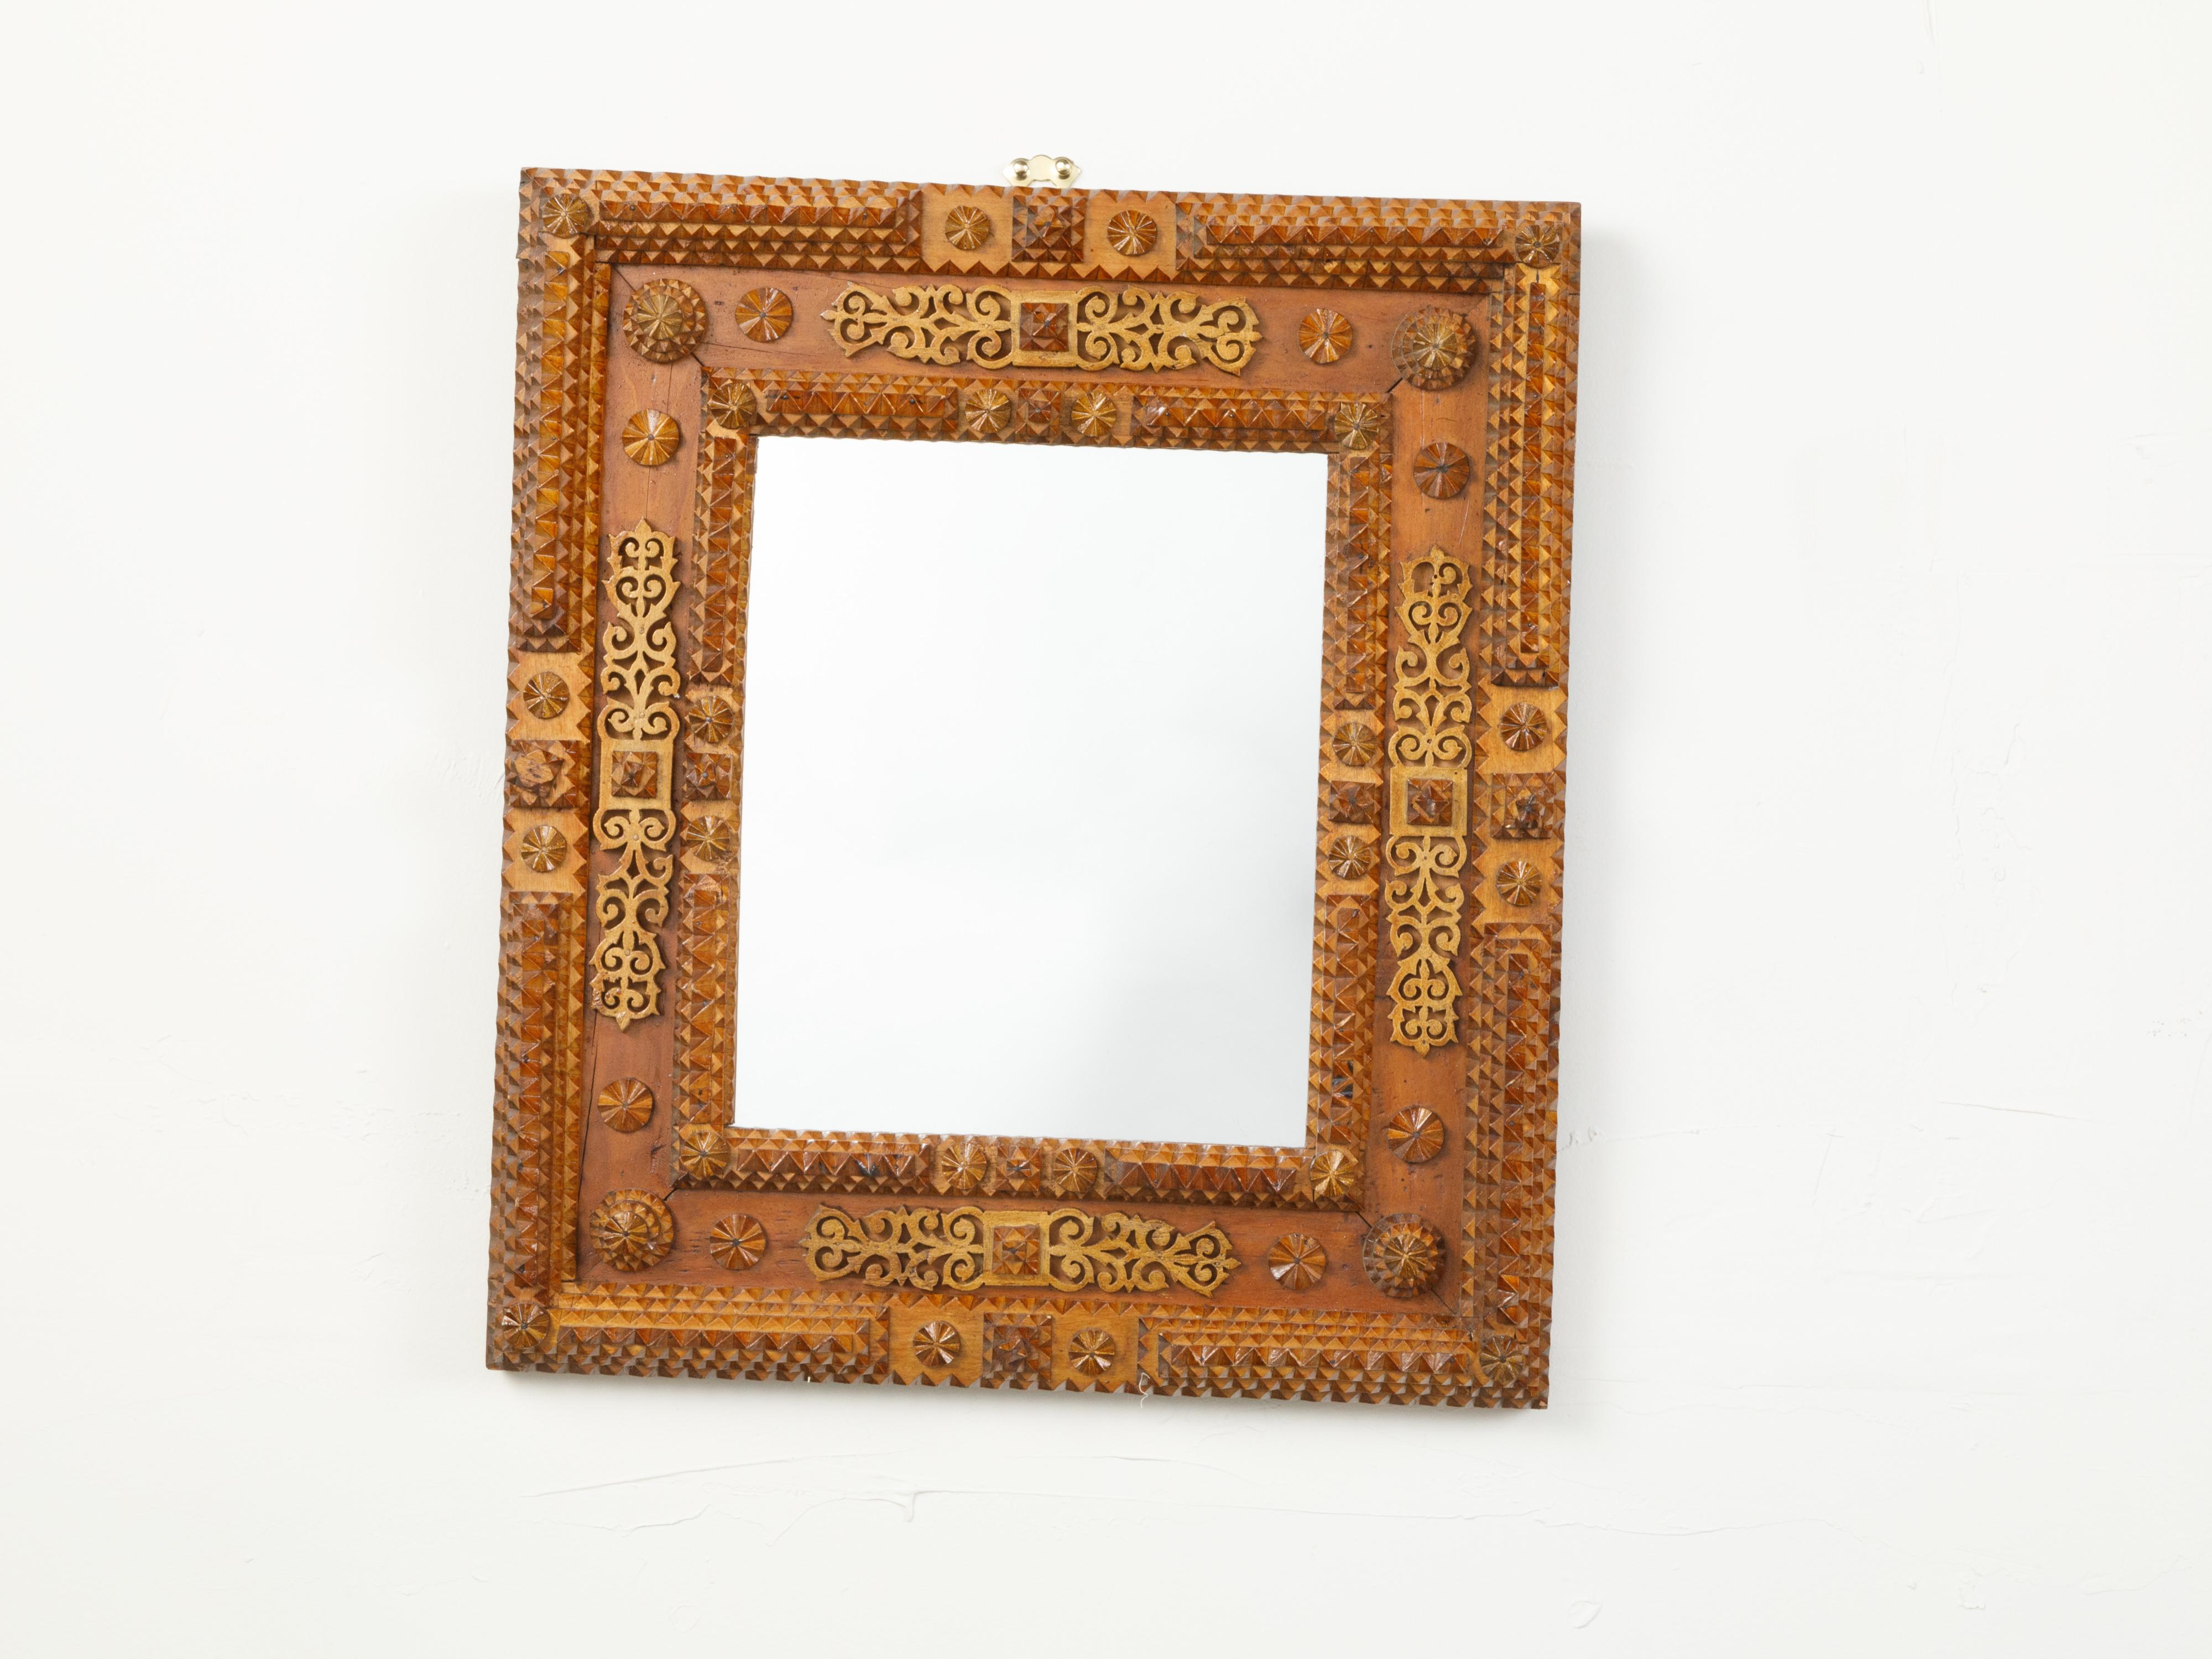 A French Tramp Art mirror from the early 20th century, with raised rosettes and ornate brass accents. Created in France at the Turn of the Century, this wall mirror was hand carved in the manner typical of the Tramp Art style. Presenting a linear